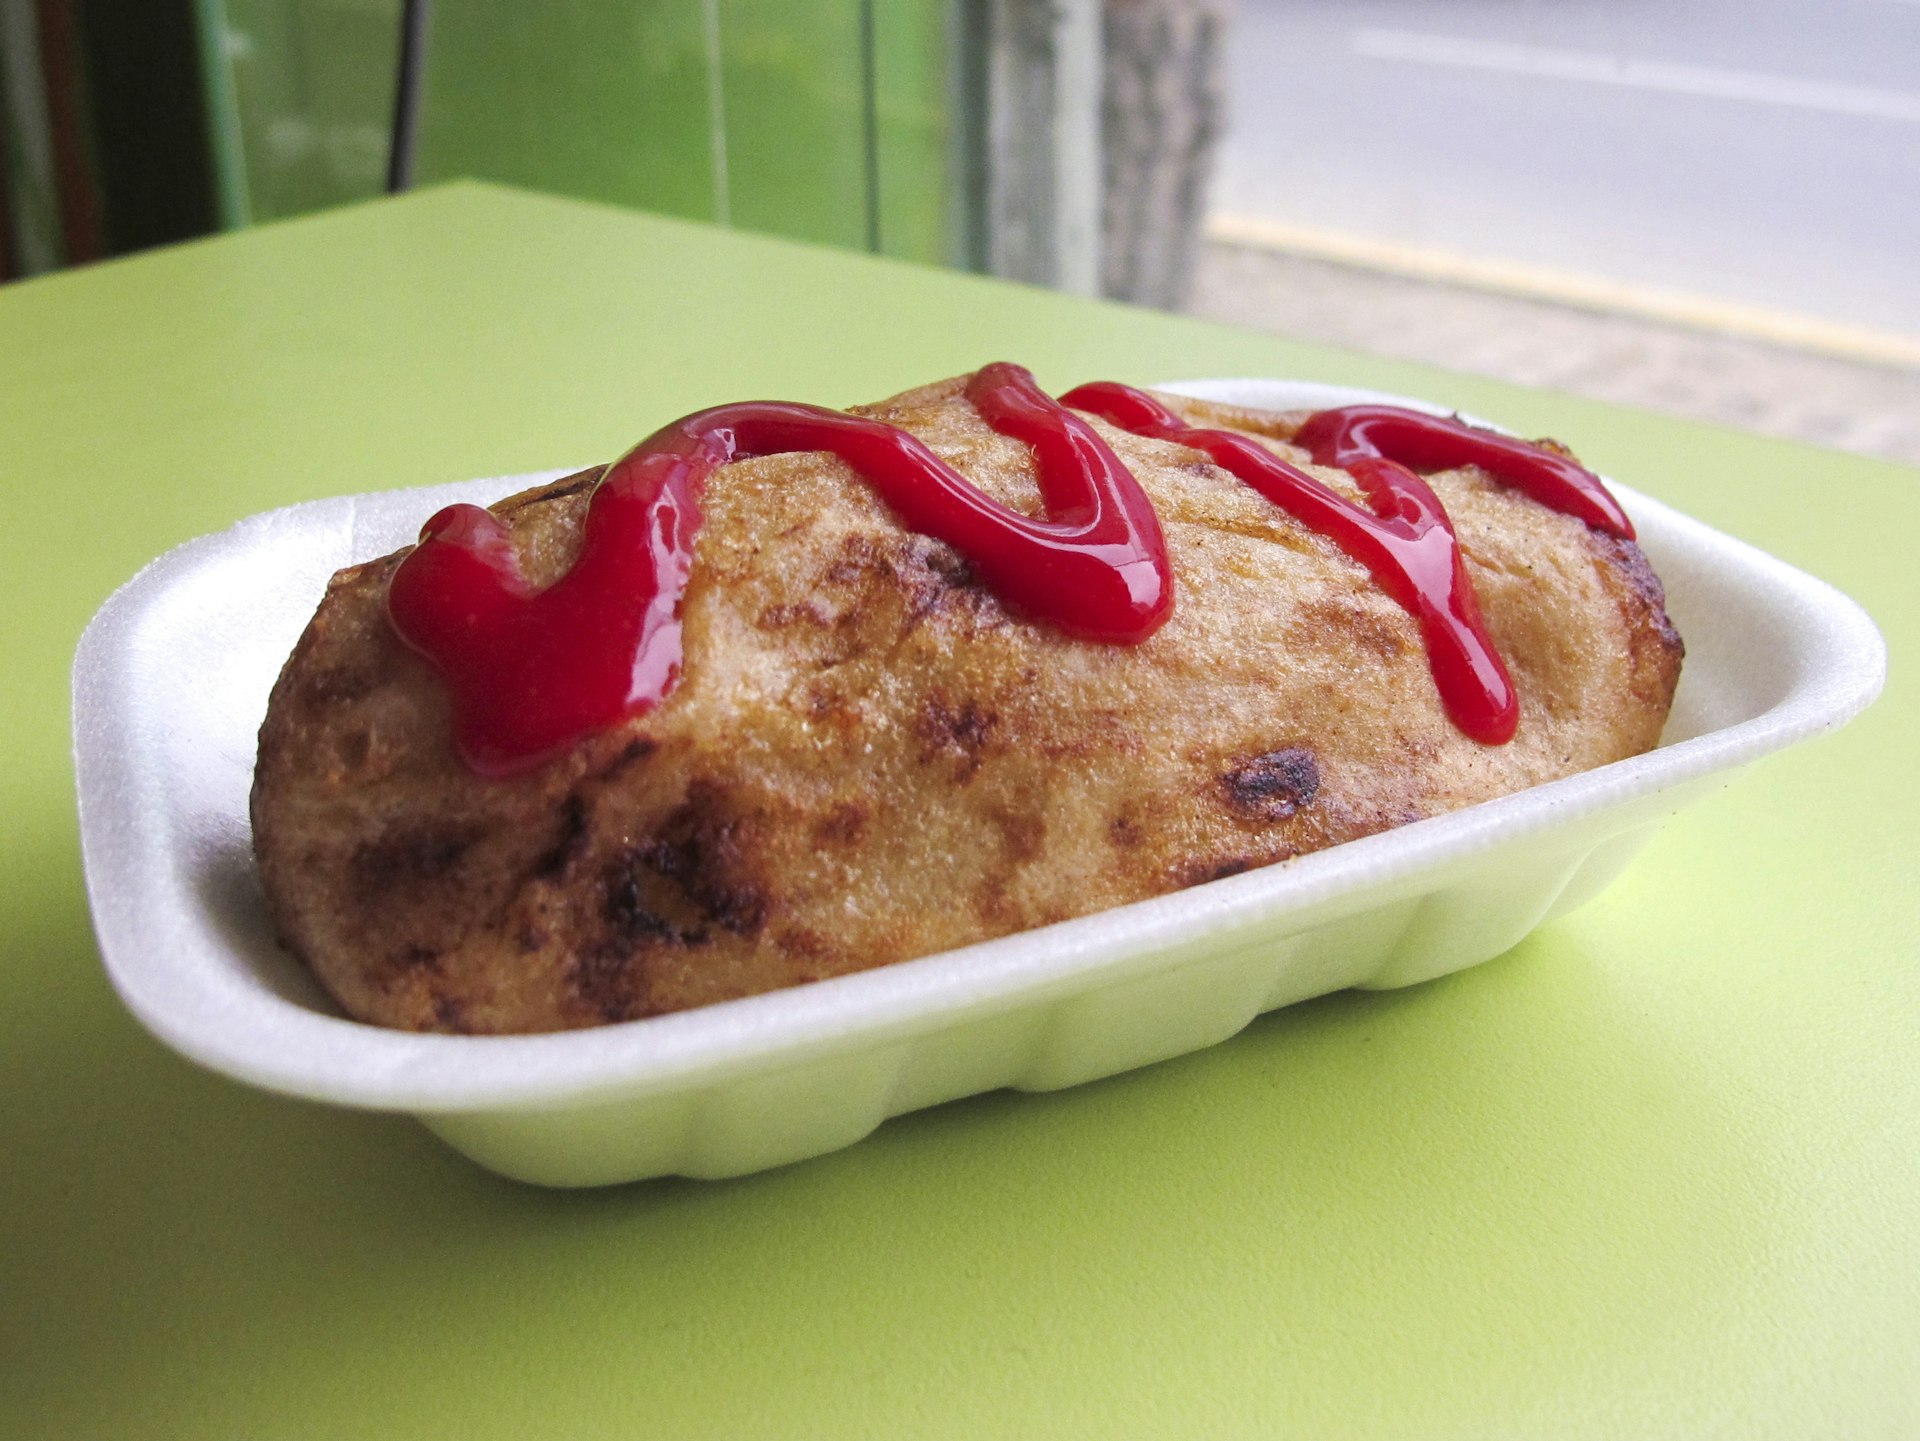 Papa rellena is a fried potato featuring a zesty meat filling © Agnes Rivera / Lonely Planet